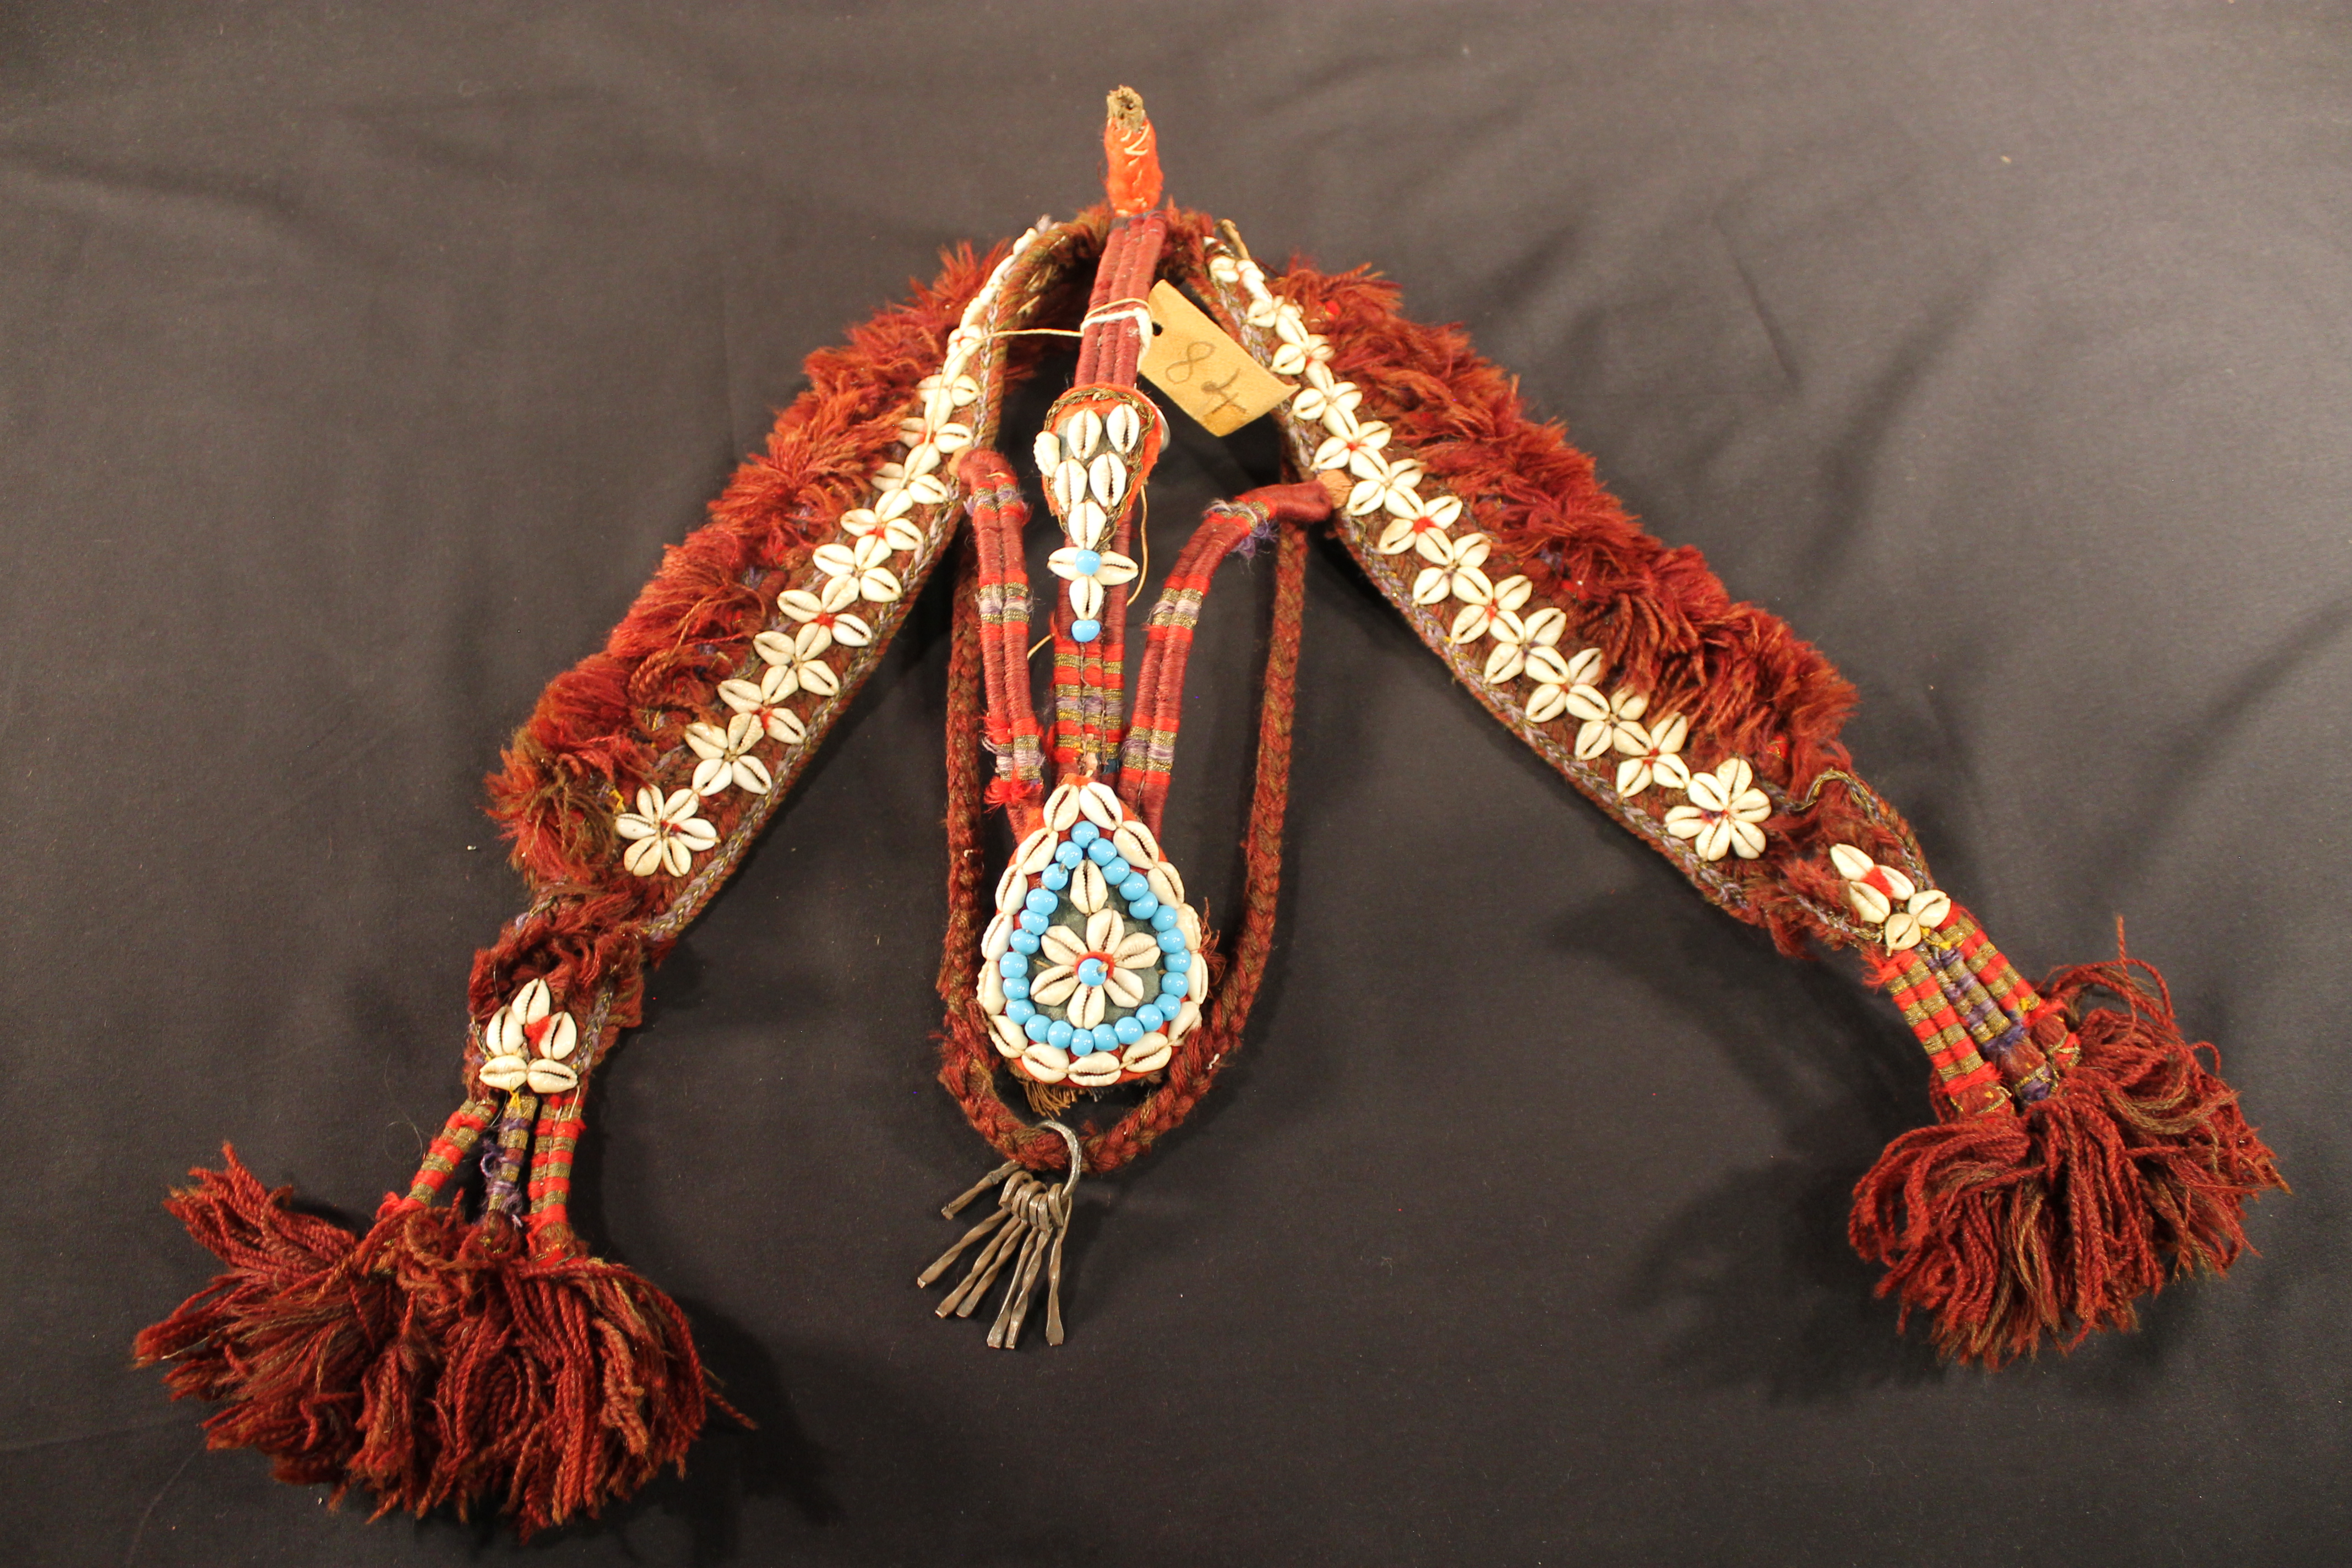 Braided yarm horse headgear has woven in shells and beads to form a star-shaped design on the side. In the center is a shell and bead pendant in the shape of a teardrop. 